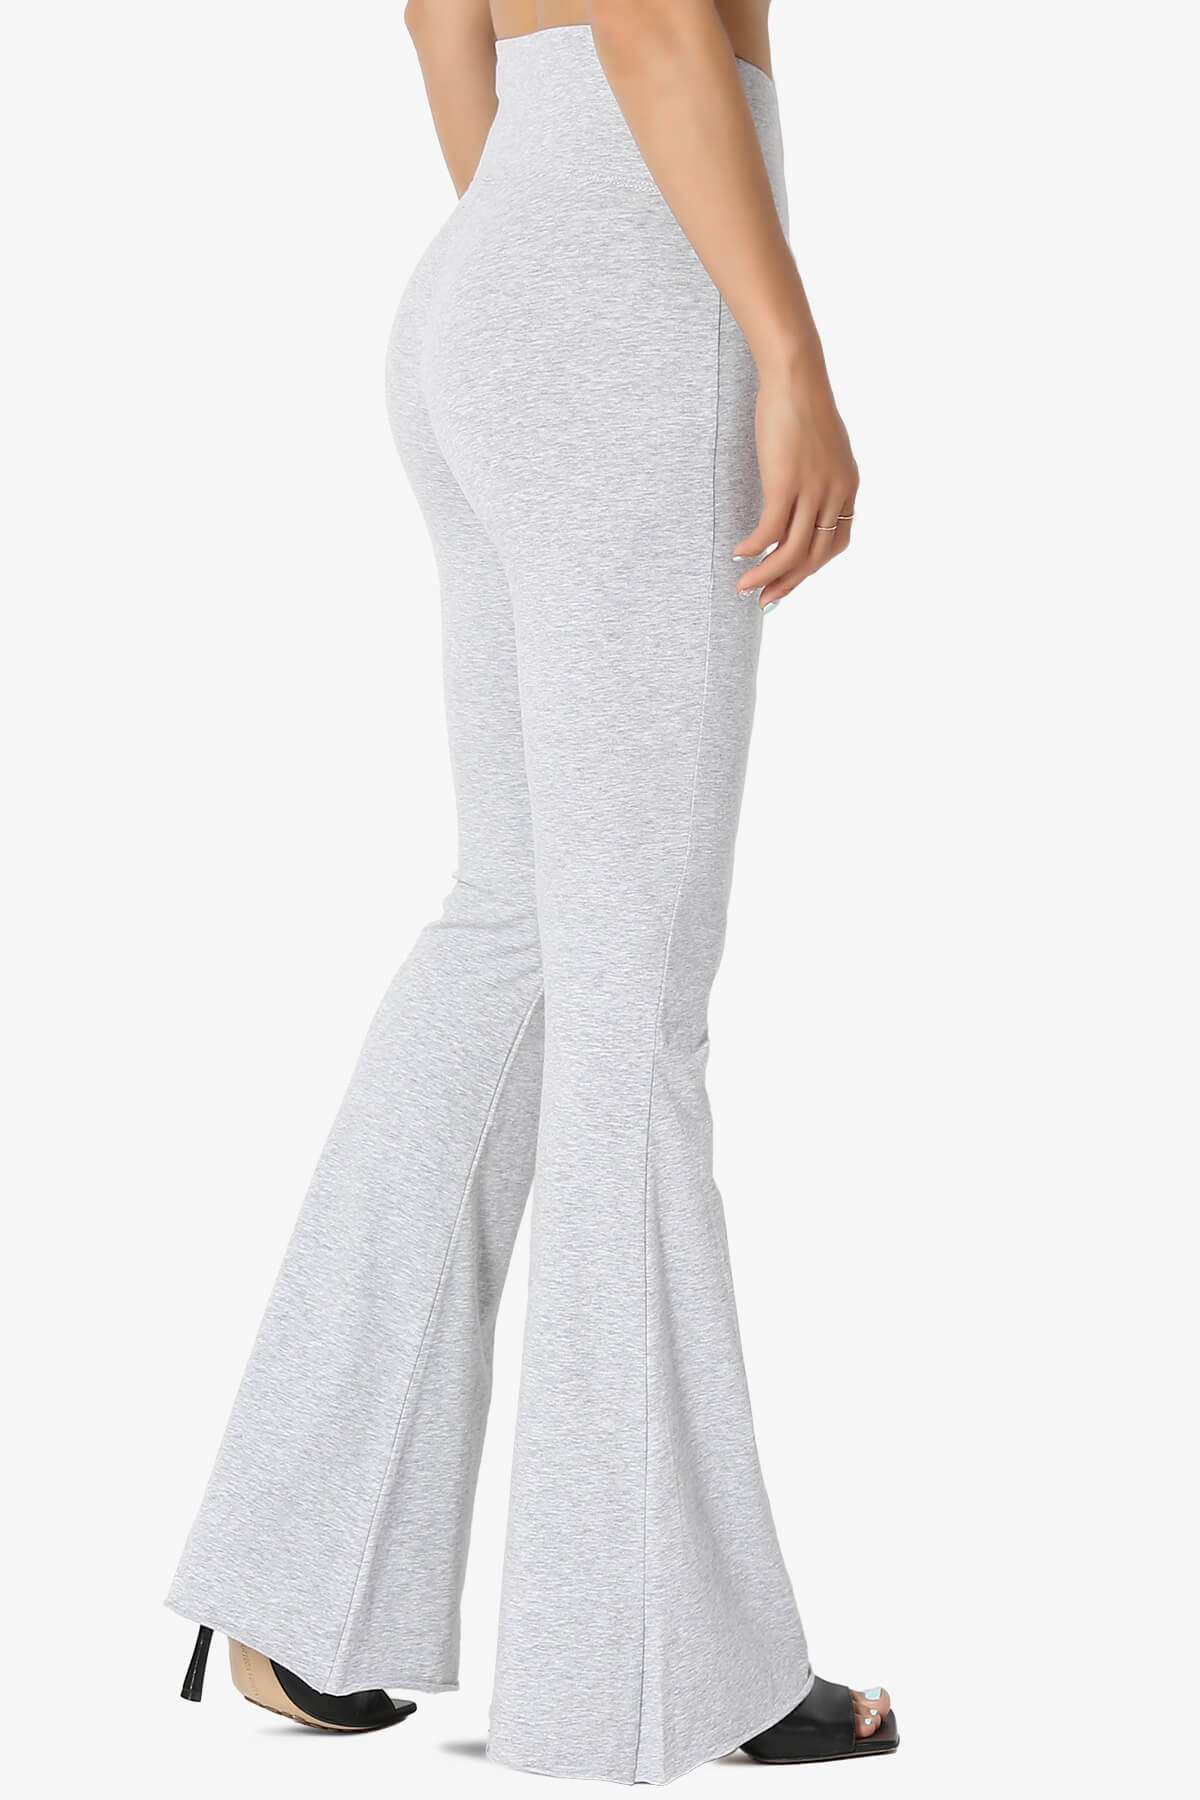 Load image into Gallery viewer, Zaylee Raw Hem Flared Comfy Yoga Pants HEATHER GREY_4
